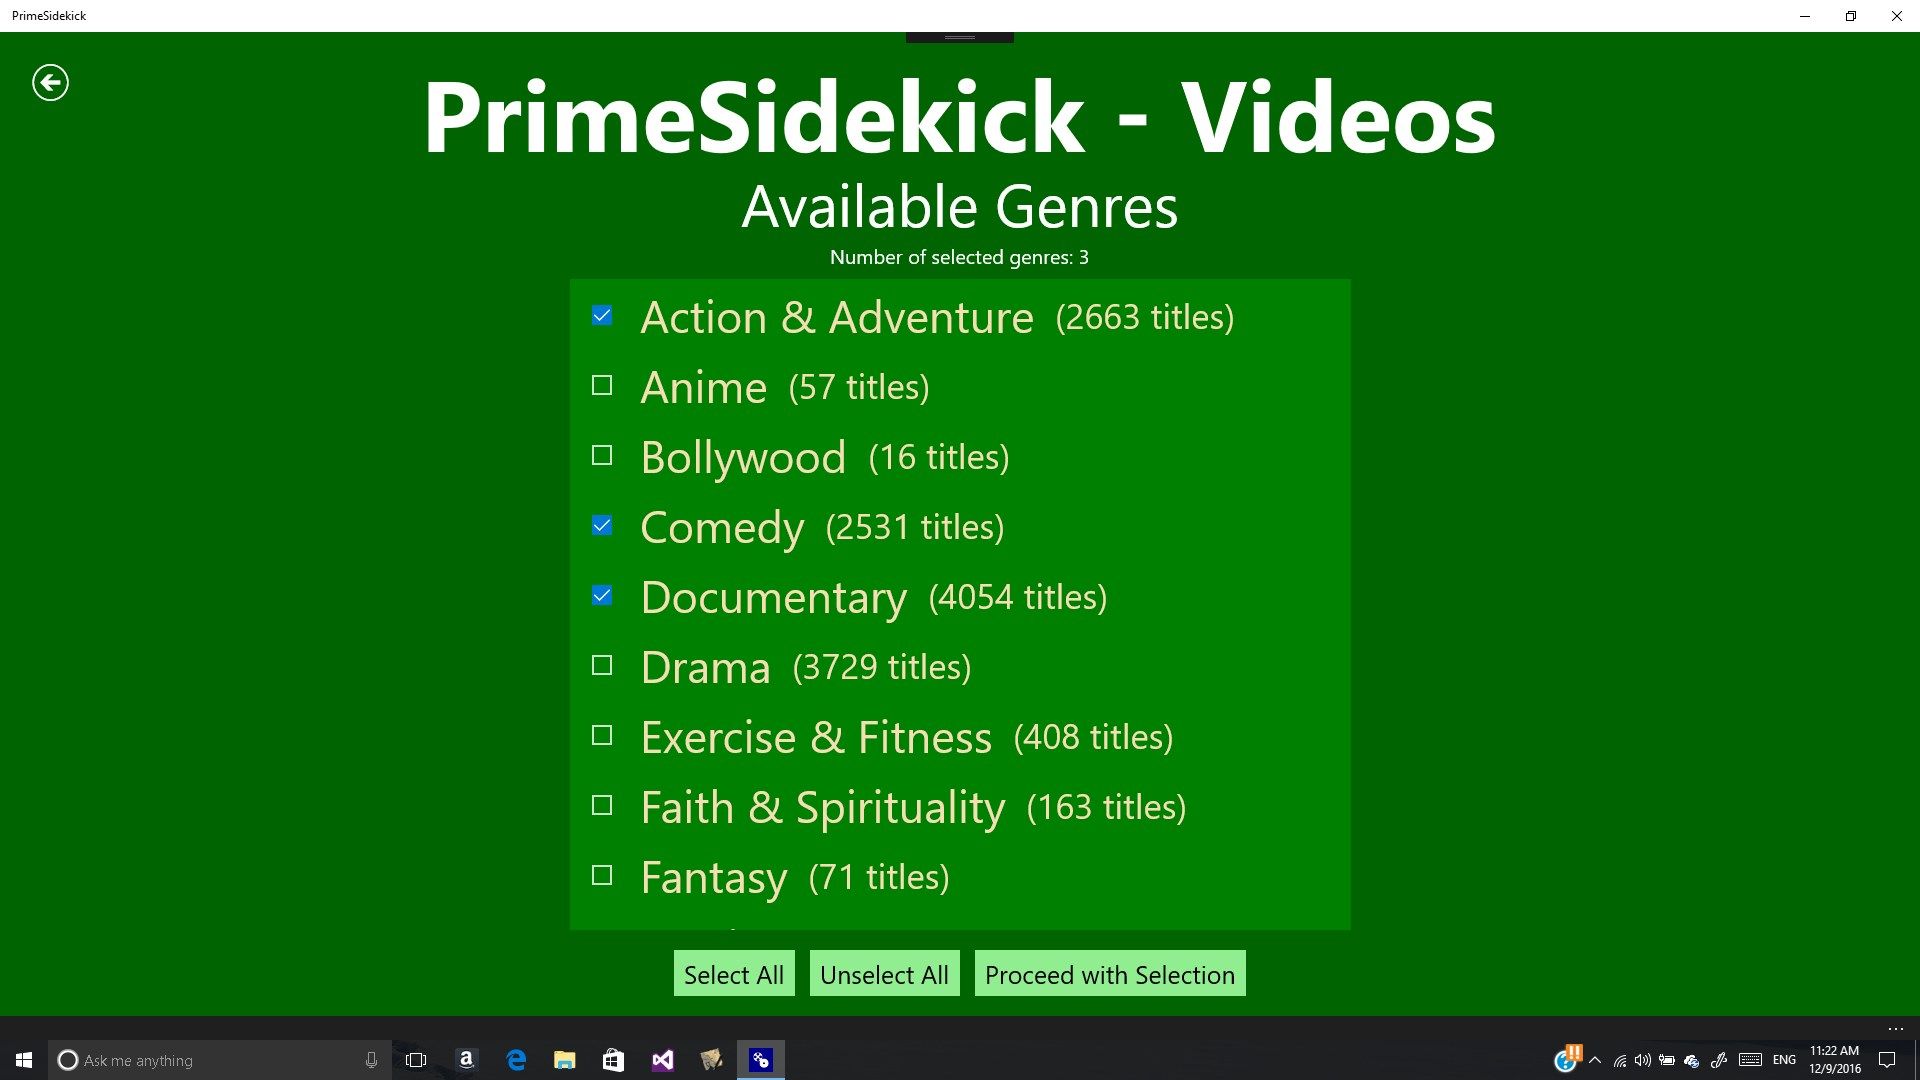 This screen allows the users to select the Amazon Prime Video genres they are interested in.